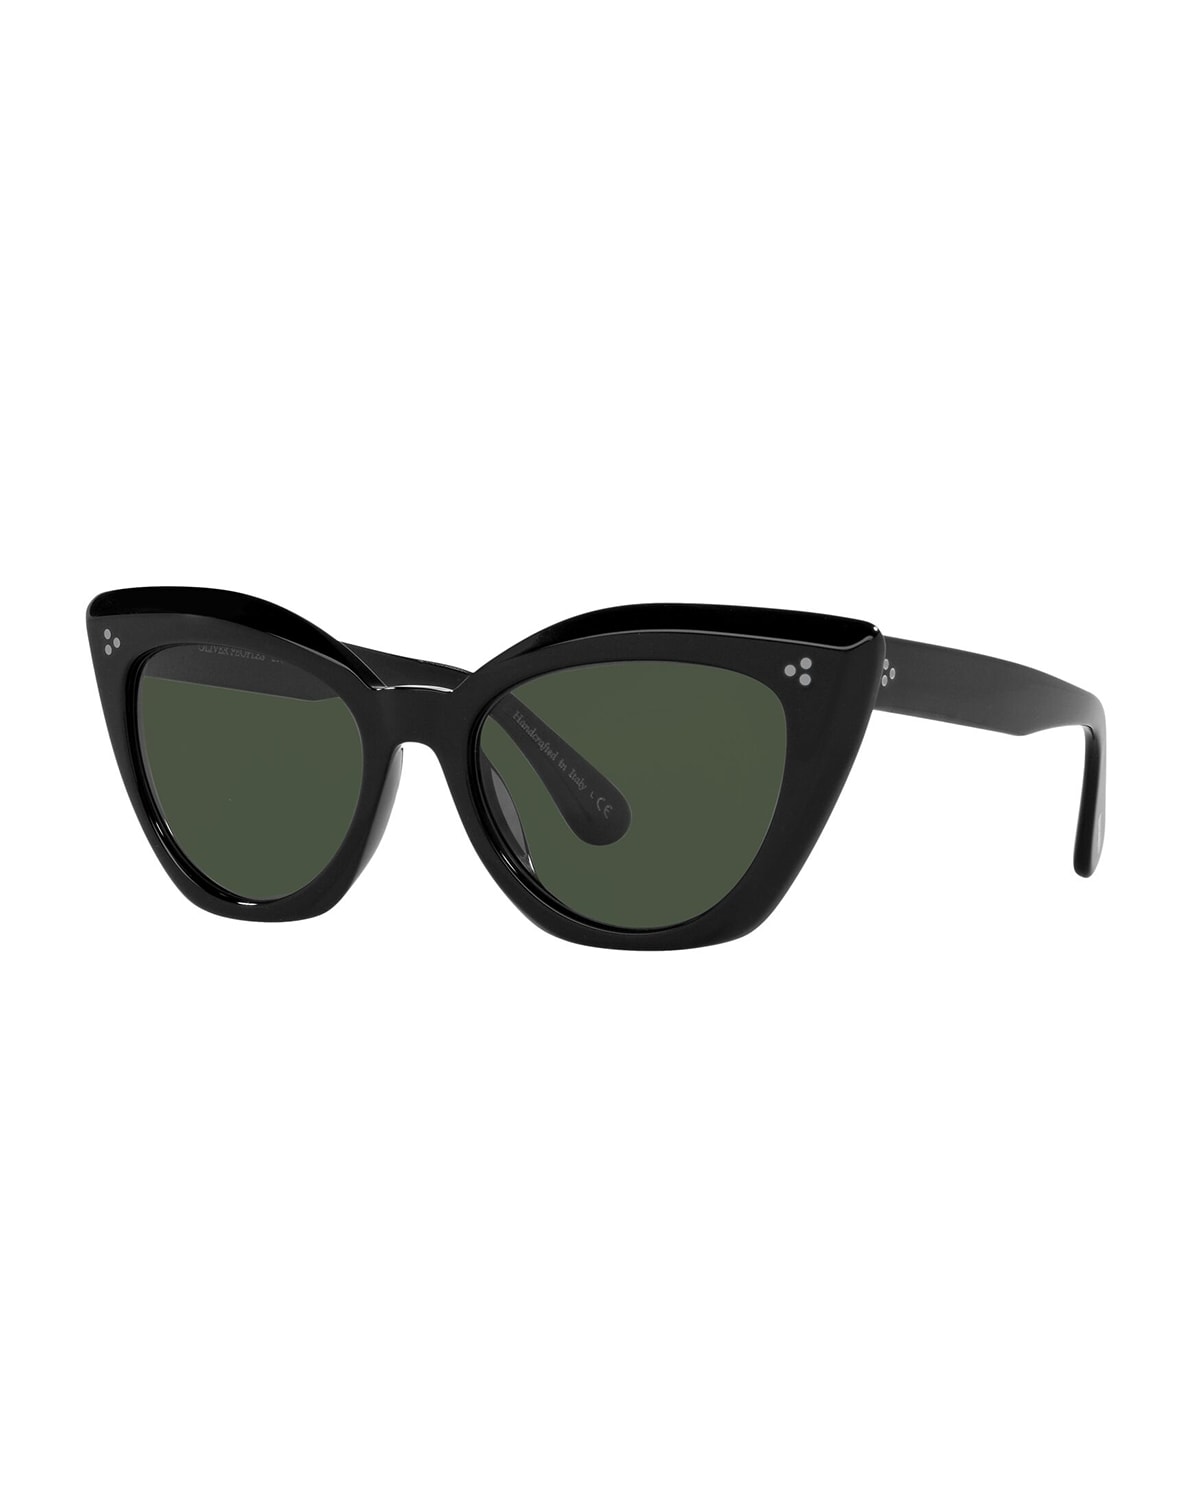 Details about   New Oliver Peoples MARCLAY Shield Sunglasses Black 62mm 